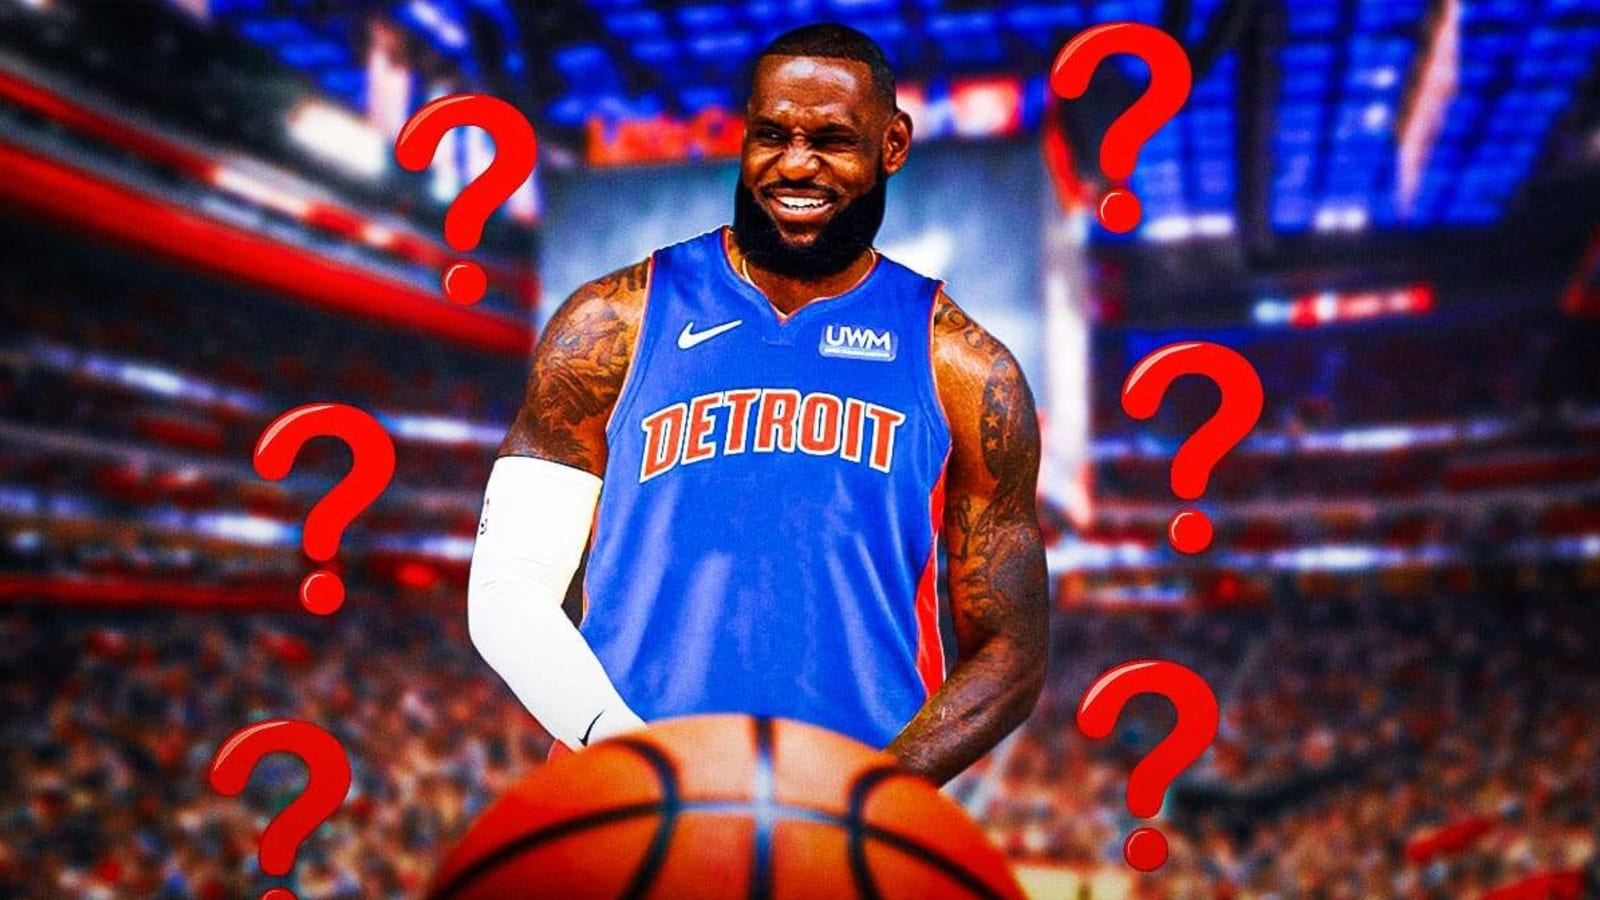 How good would LeBron James be if he was drafted by the Detroit Pistons in 2003?